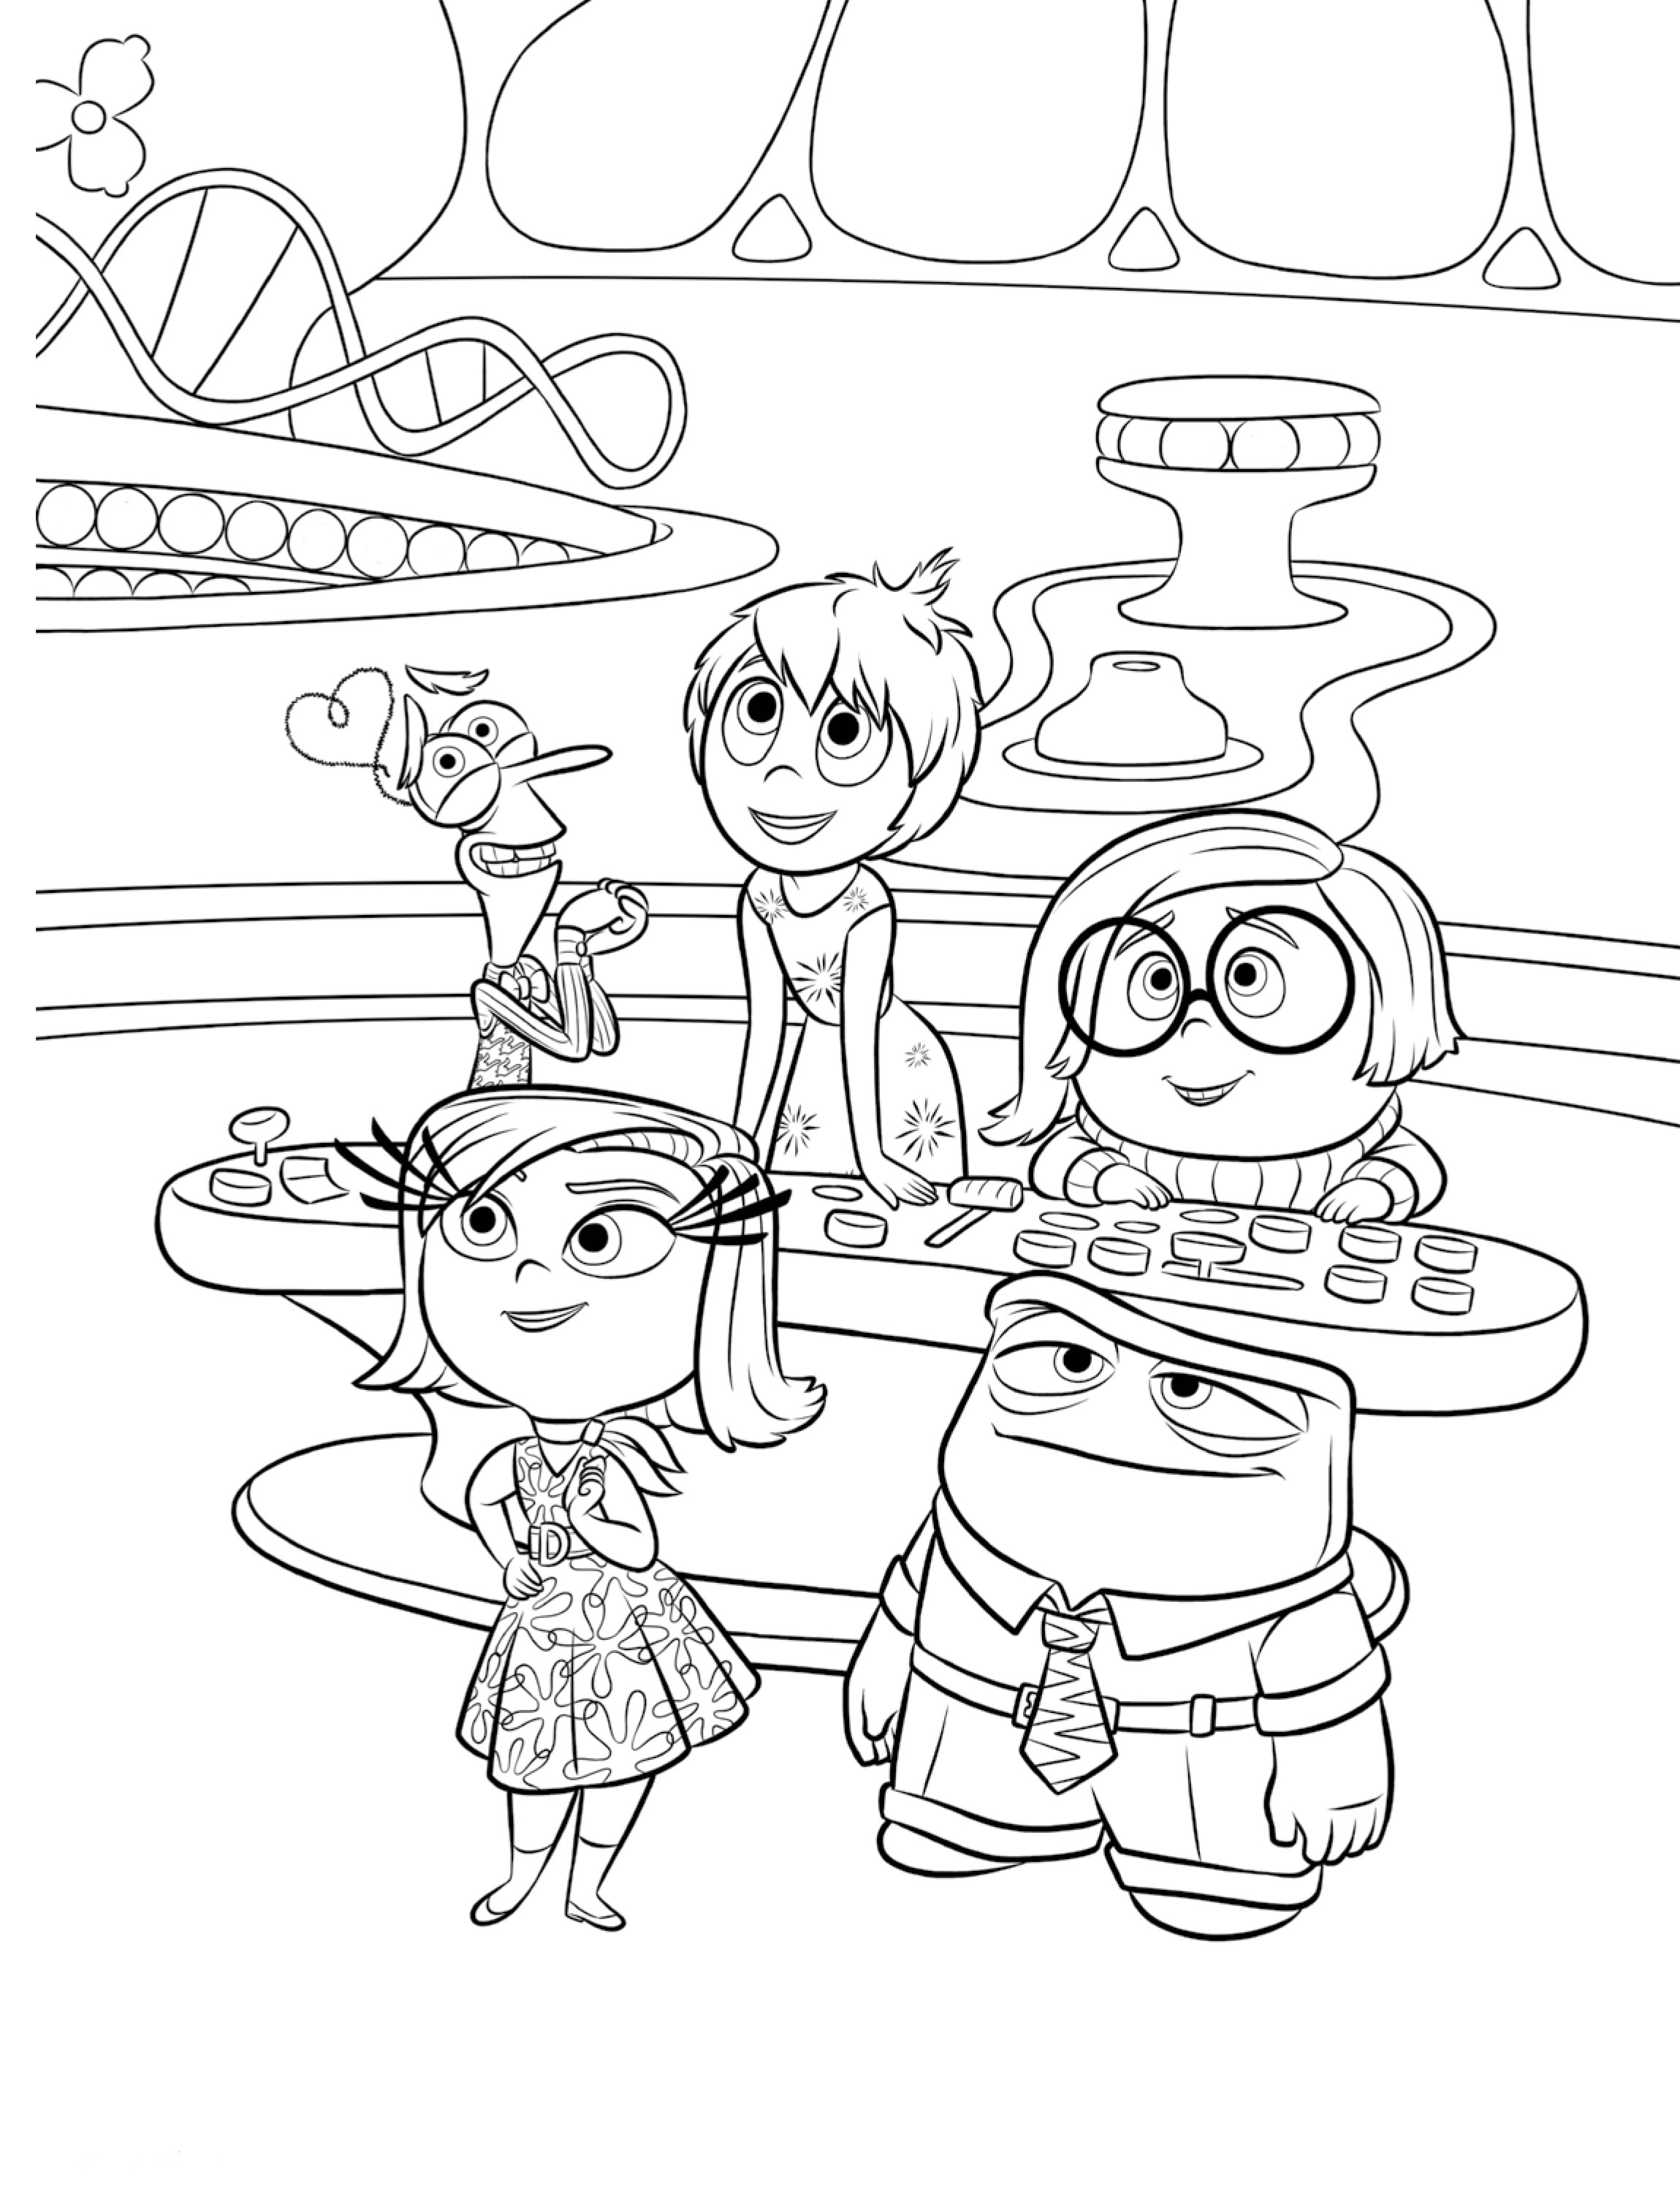 Coloring Pages Inside Out
 Inside Out Coloring Pages Best Coloring Pages For Kids